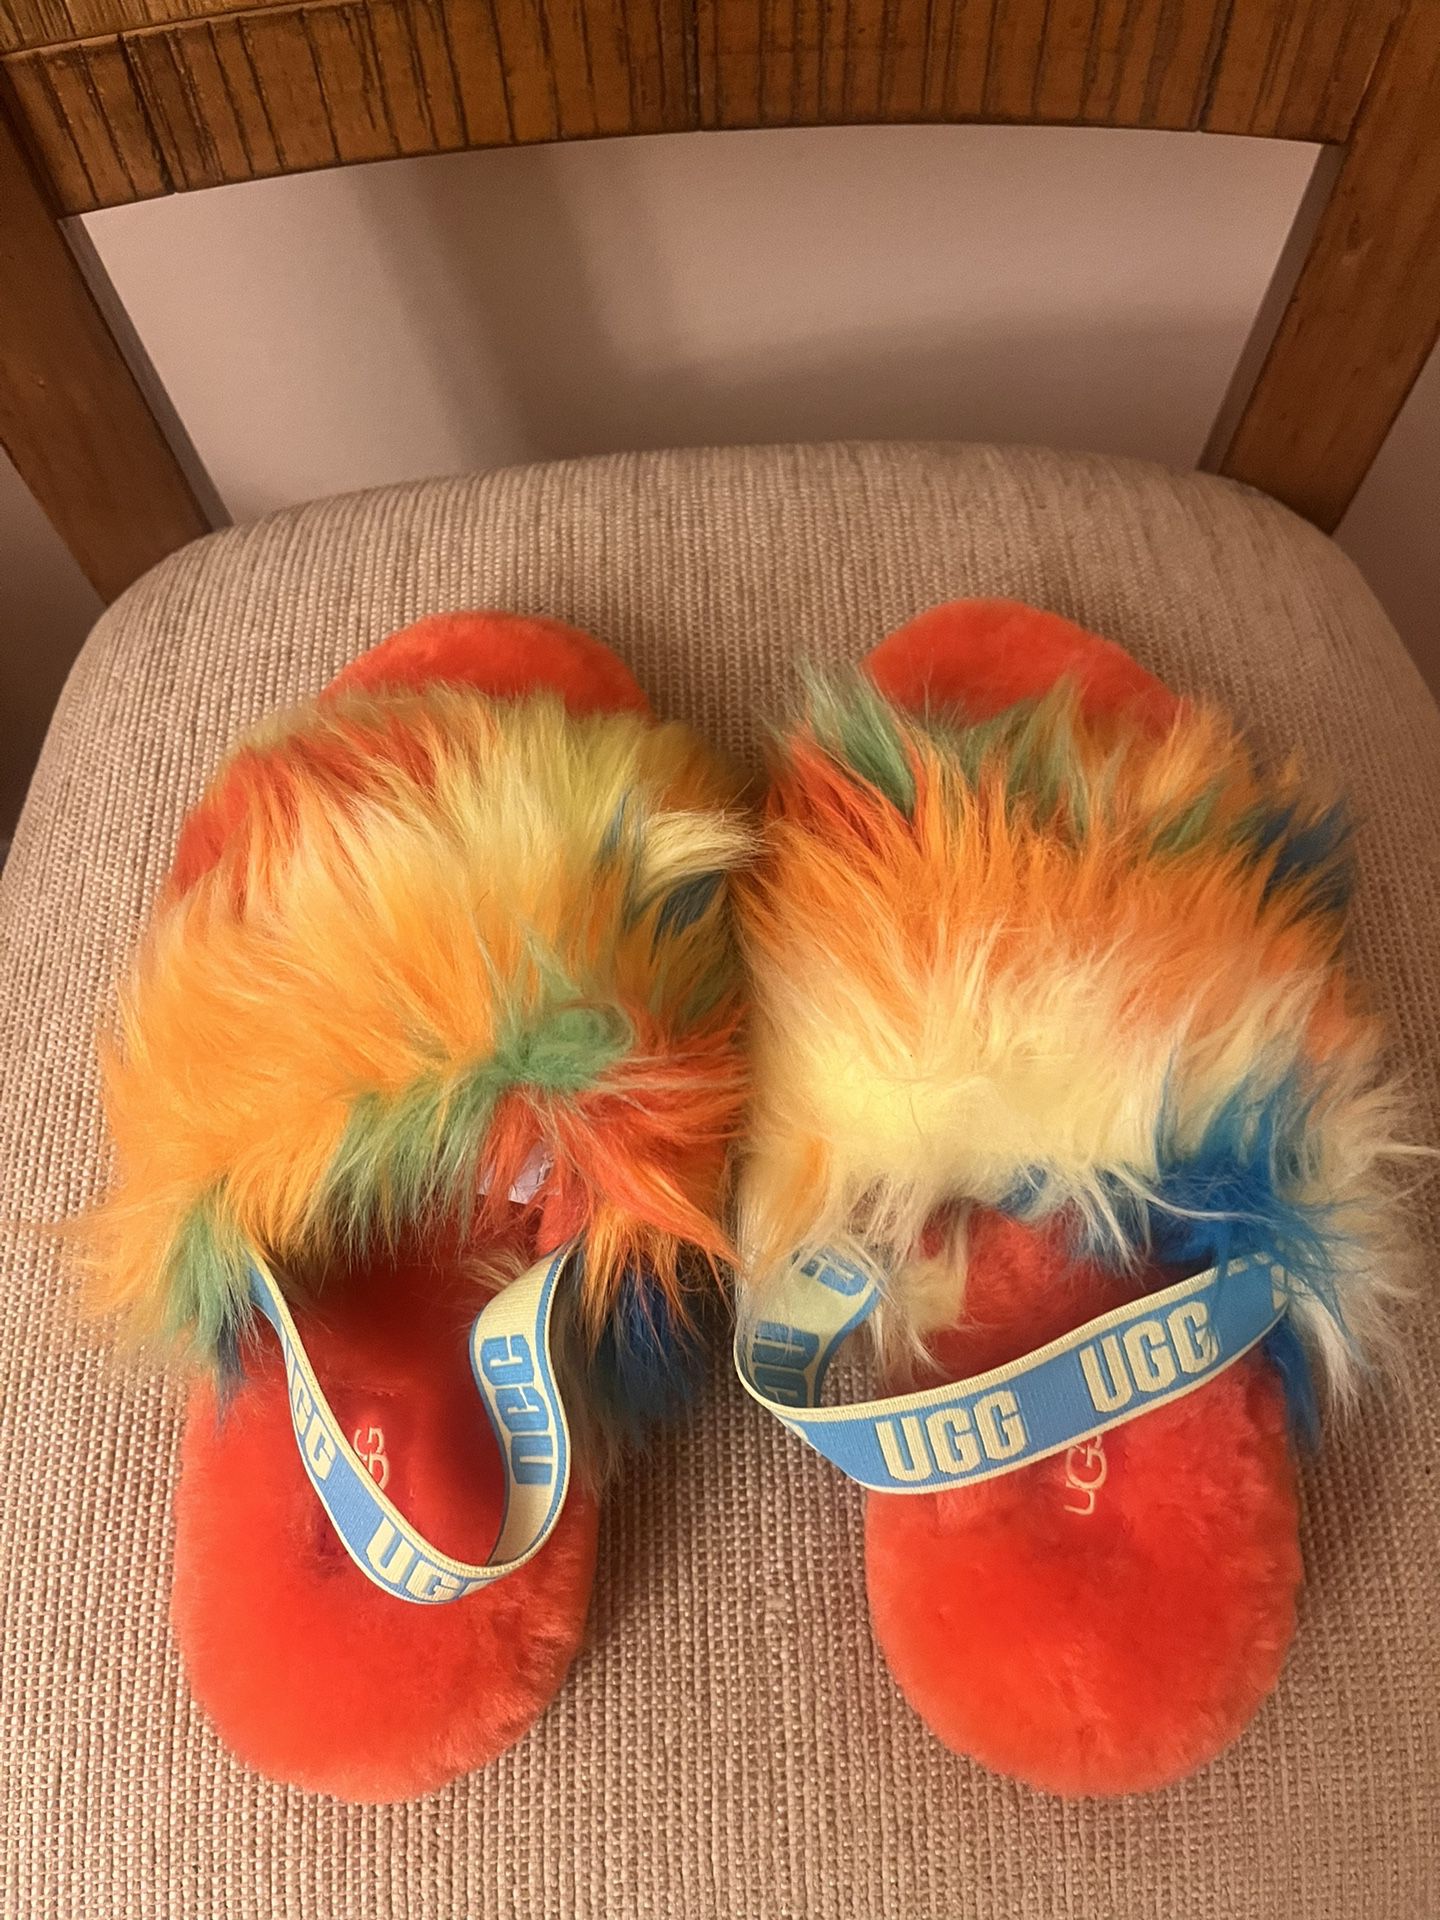 UGG WOMENS FLUFF SLIPPERS SIZE 5